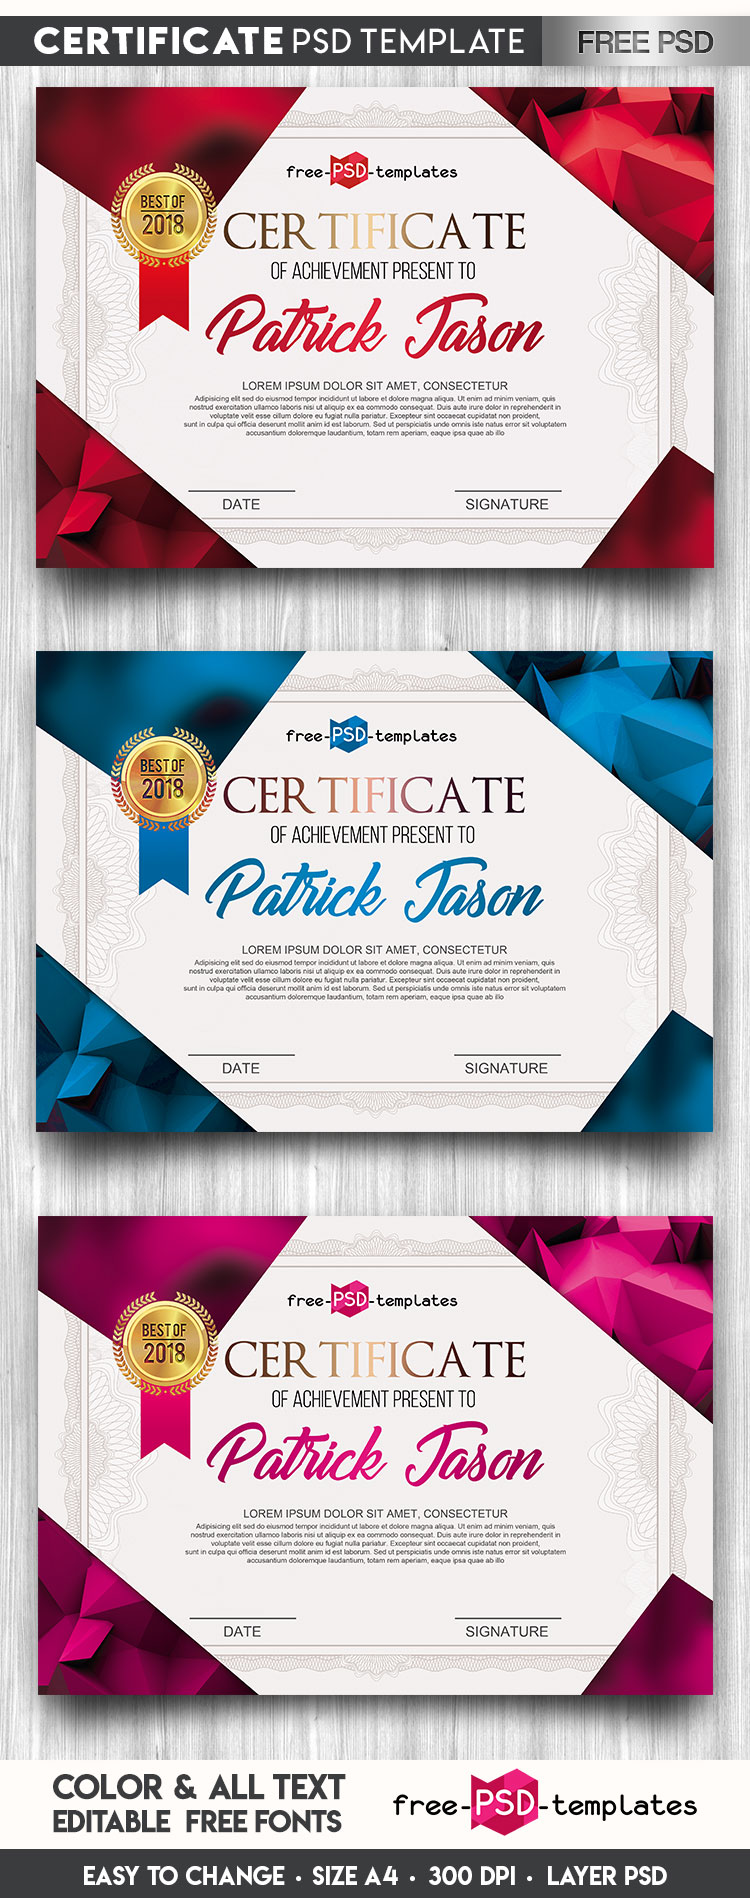 free-certificate-template-in-psd-free-psd-templates